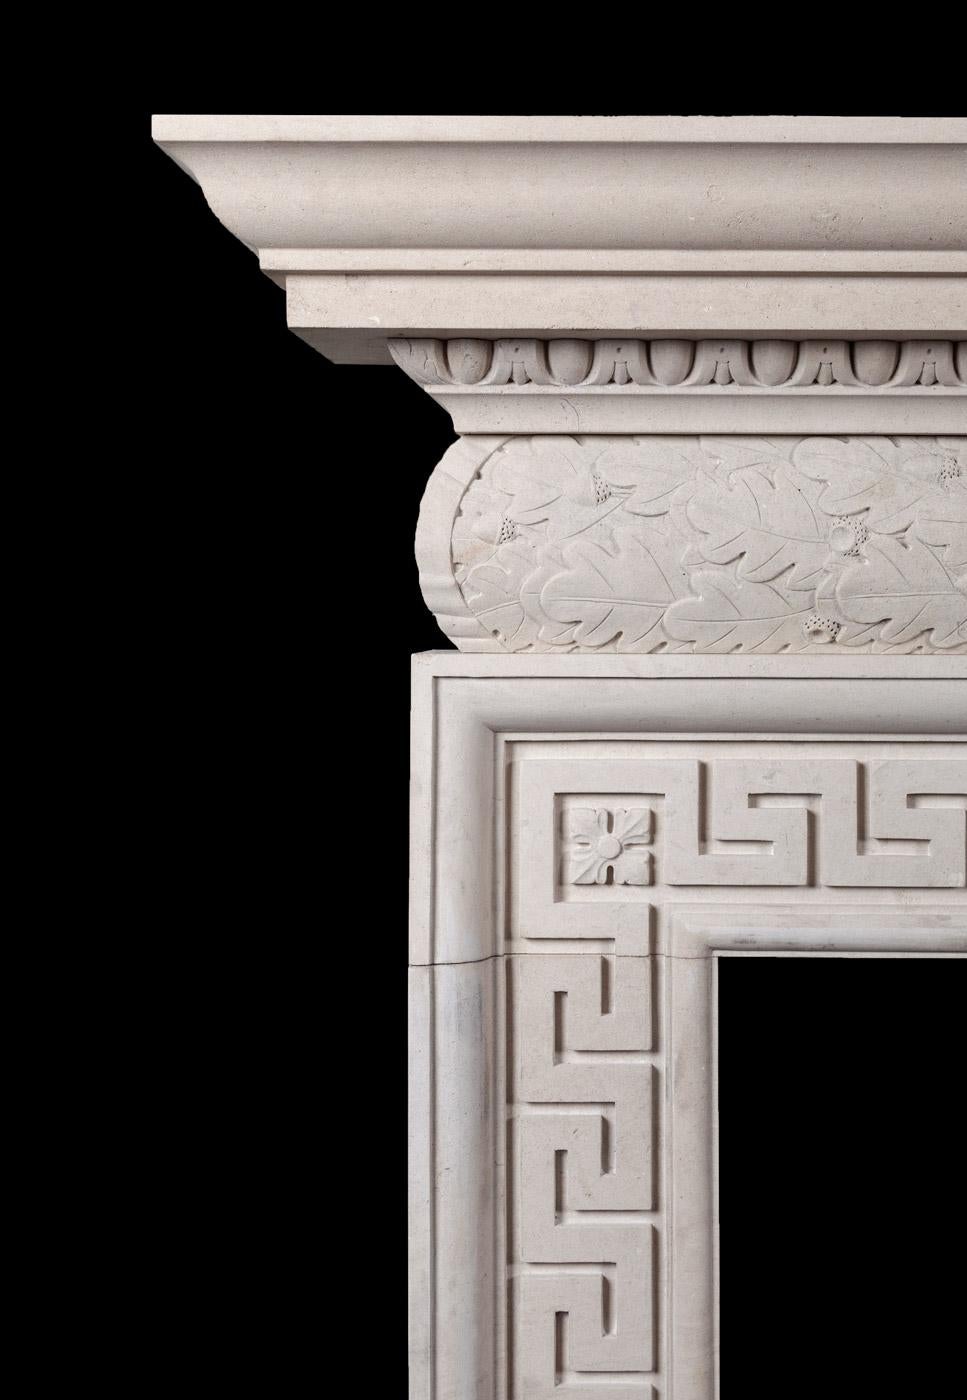 A mid-18th century style fireplace, which features a barrel shaped frieze carved with oak leafs and acorns. Resting on the frieze is an egg and dart cornice and surrounding the aperture a continuous Greek key pattern.

Can be distressed to